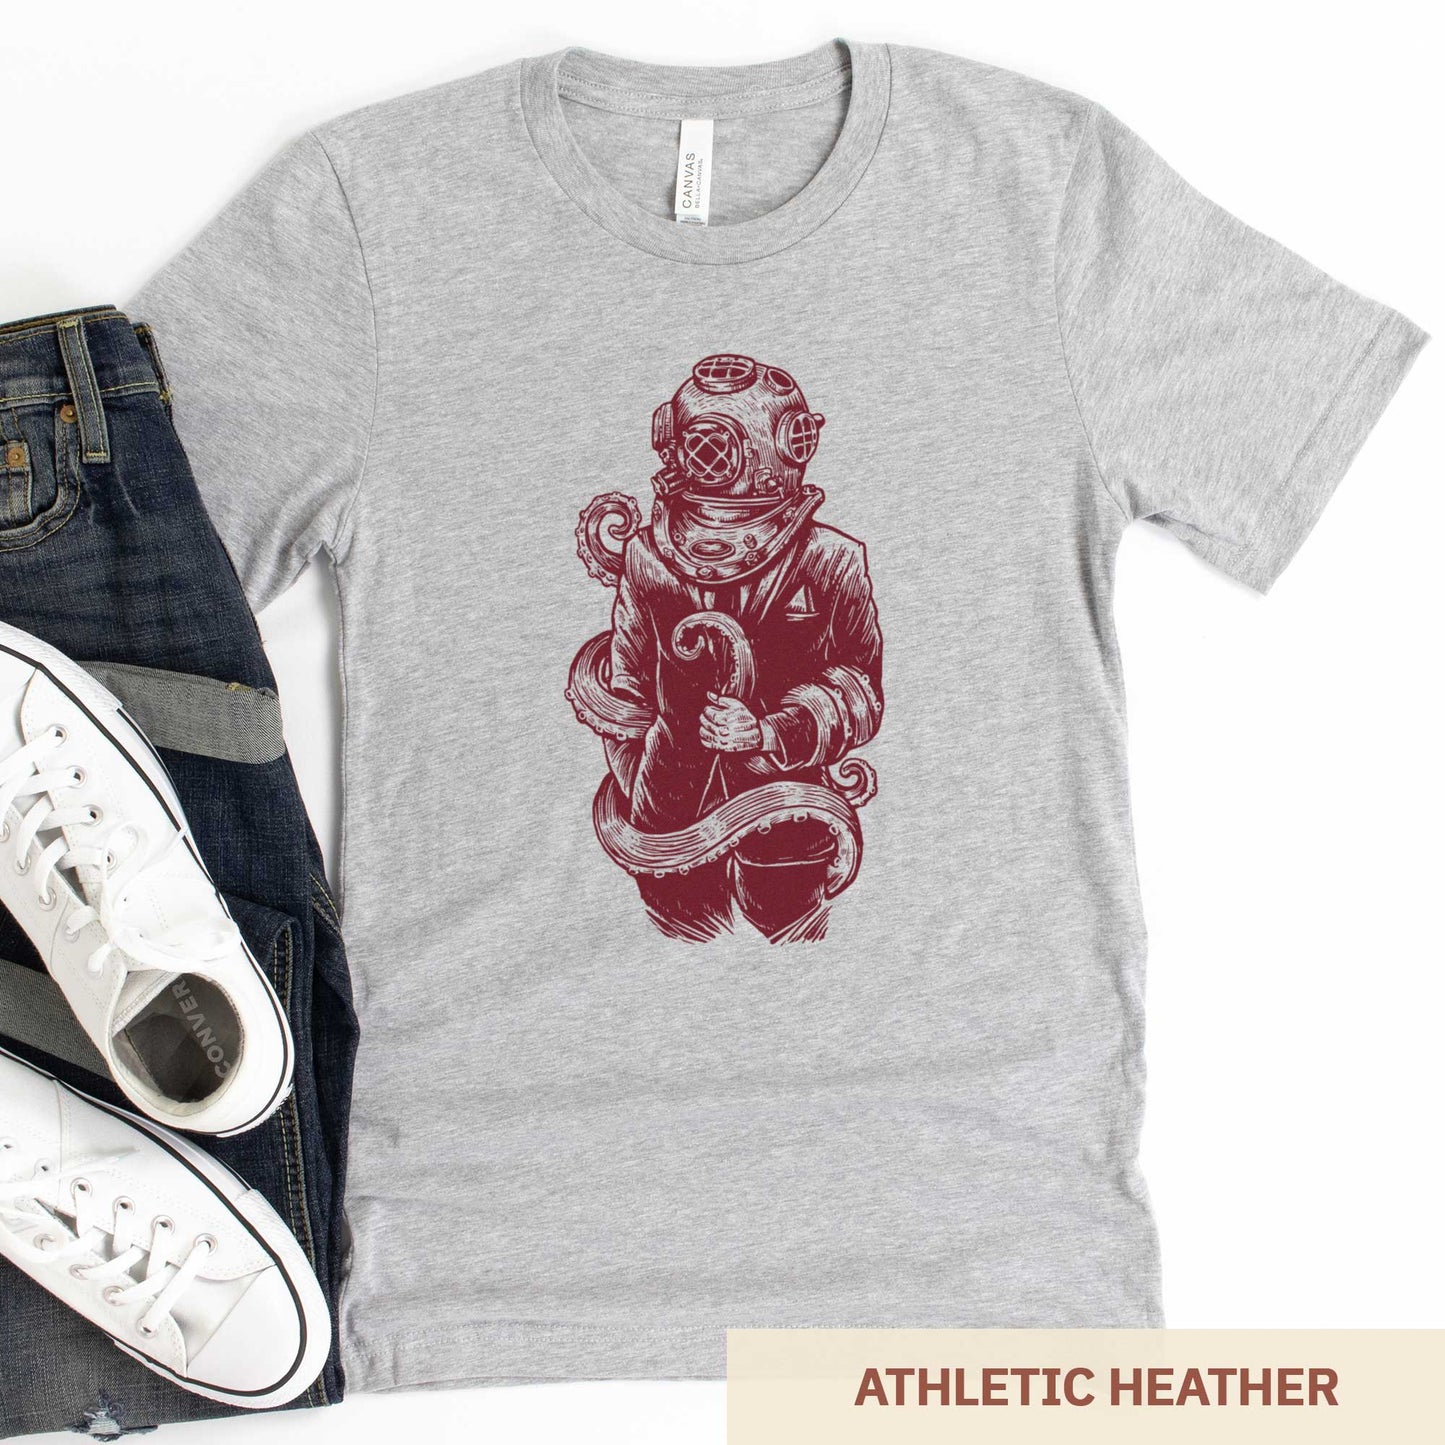 An athletic heather Bella Canvas t-shirt featuring a figure in a business suit wearing a vintage diver's helmet with octopus tentacles wrapped around them.